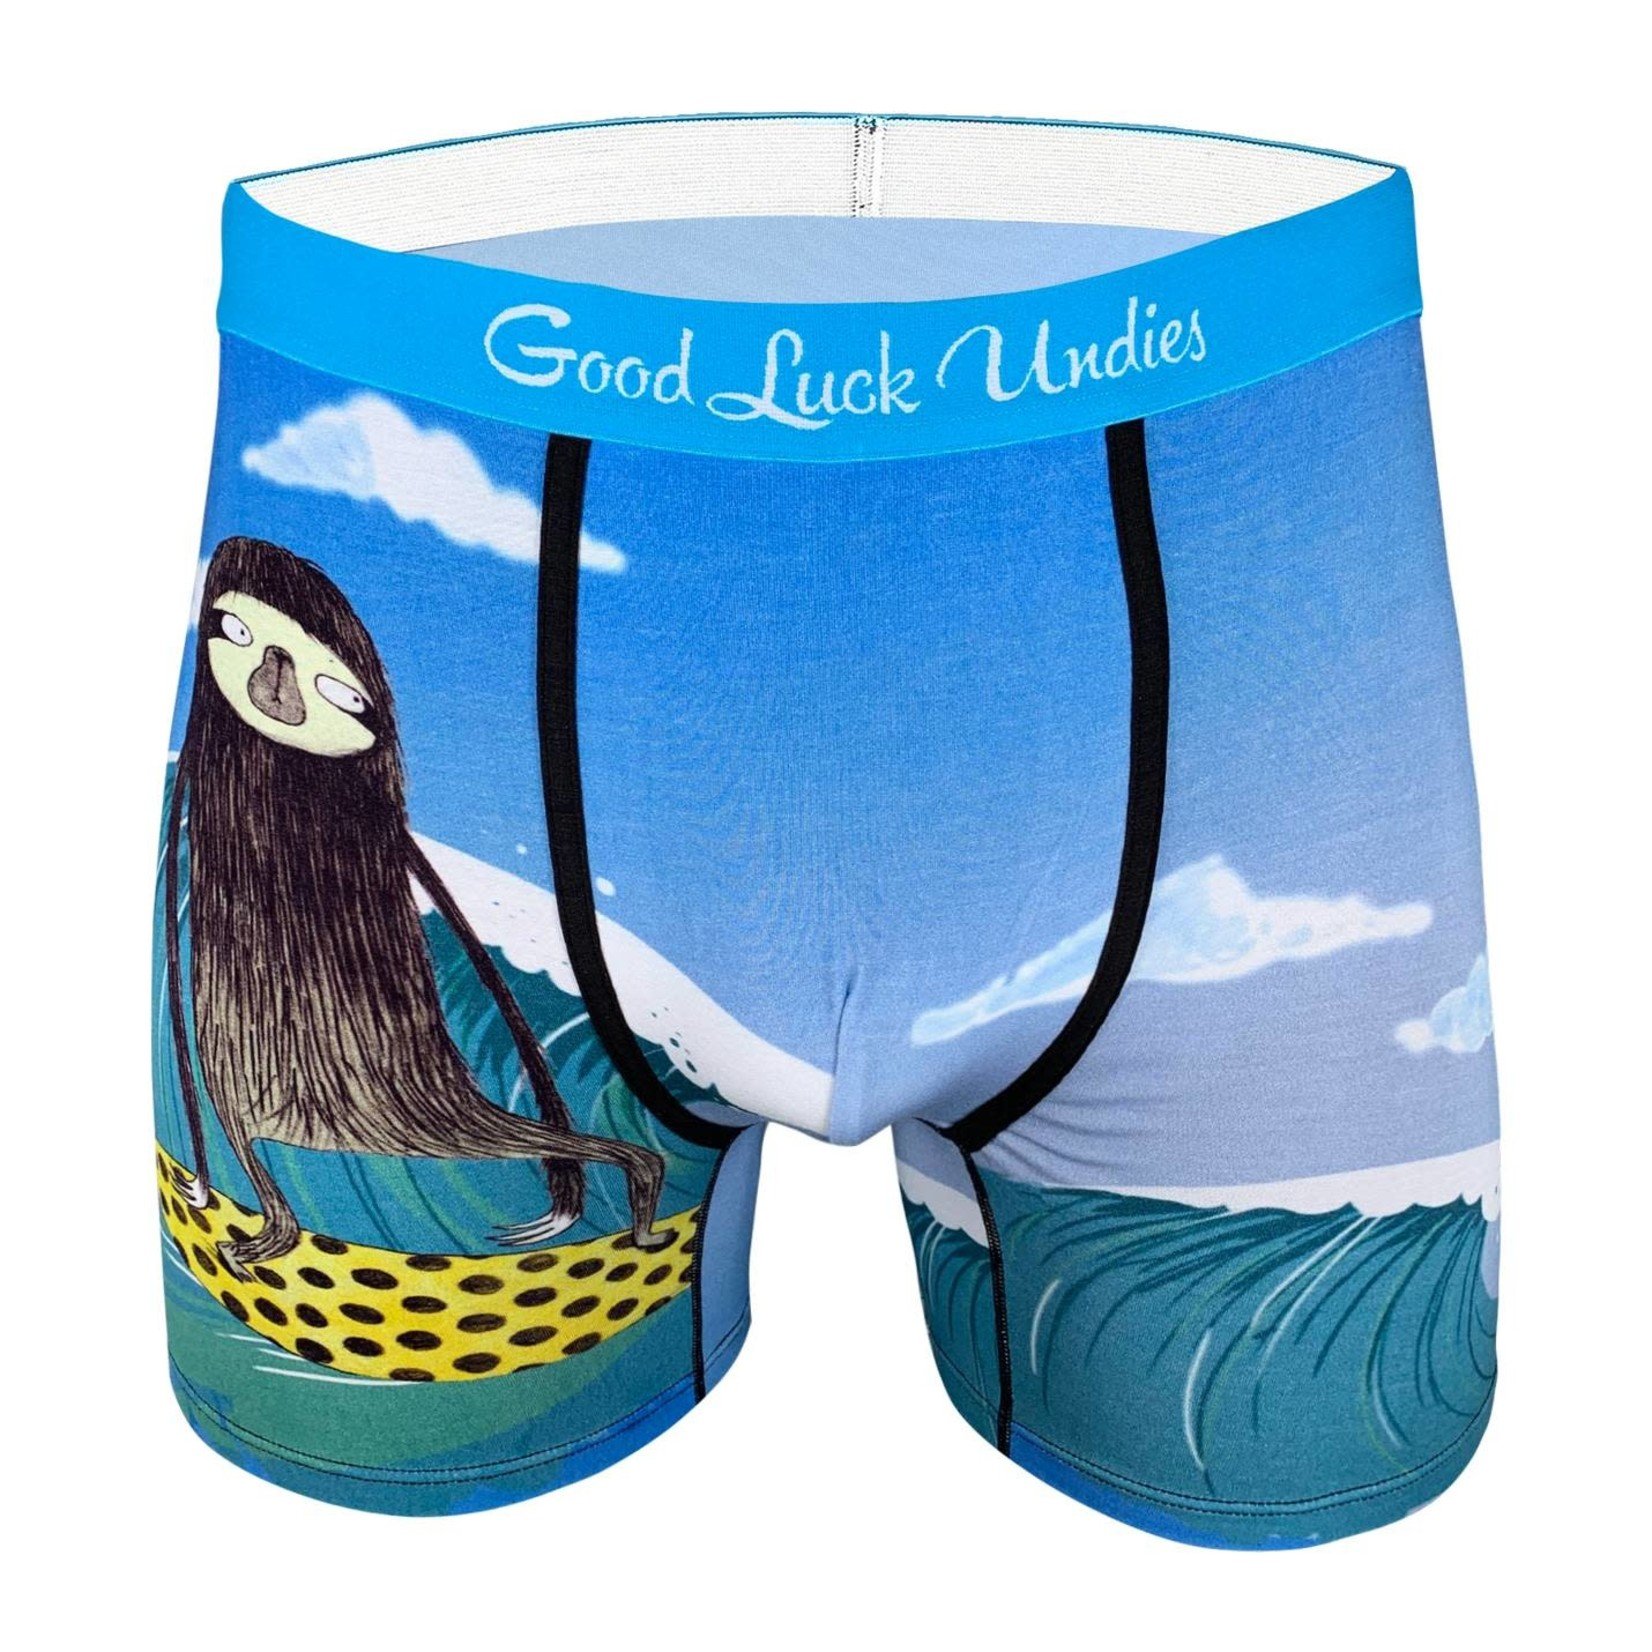 Surfing Sloth Men's Boxer Briefs by Good Luck Undies - The Periwinkle Shoppe